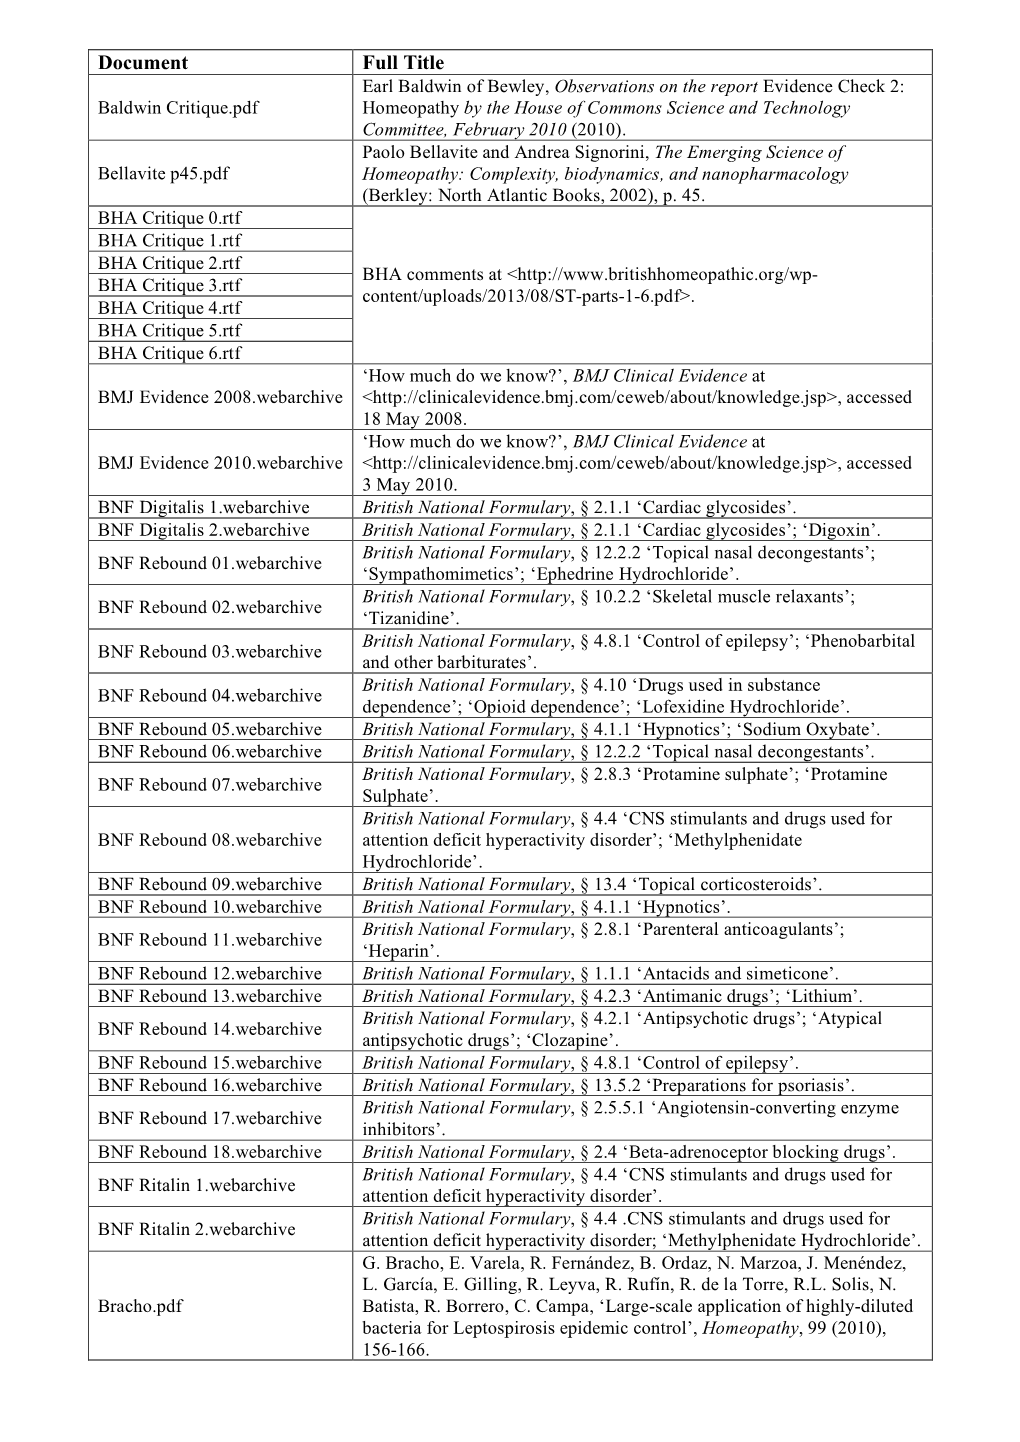 2010-12-08B HMC21 Supporting Documents